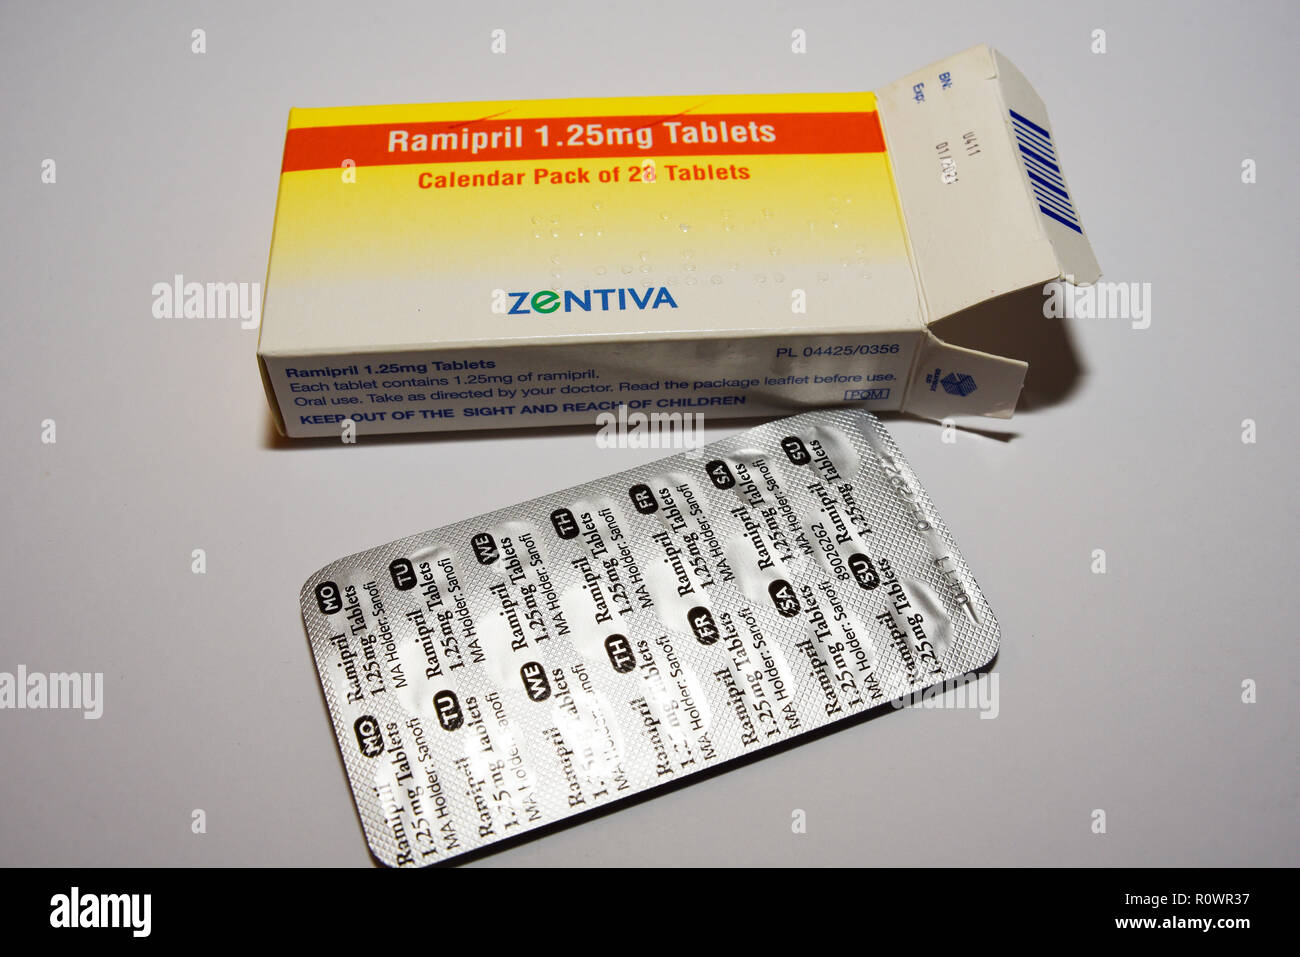 Ramipril tablets. 1,25mg medication pack of pills. Box of medical tablets  isolated on a white background. Zentiva. Manufactured by Sanofi, Italy. EU  Stock Photo - Alamy